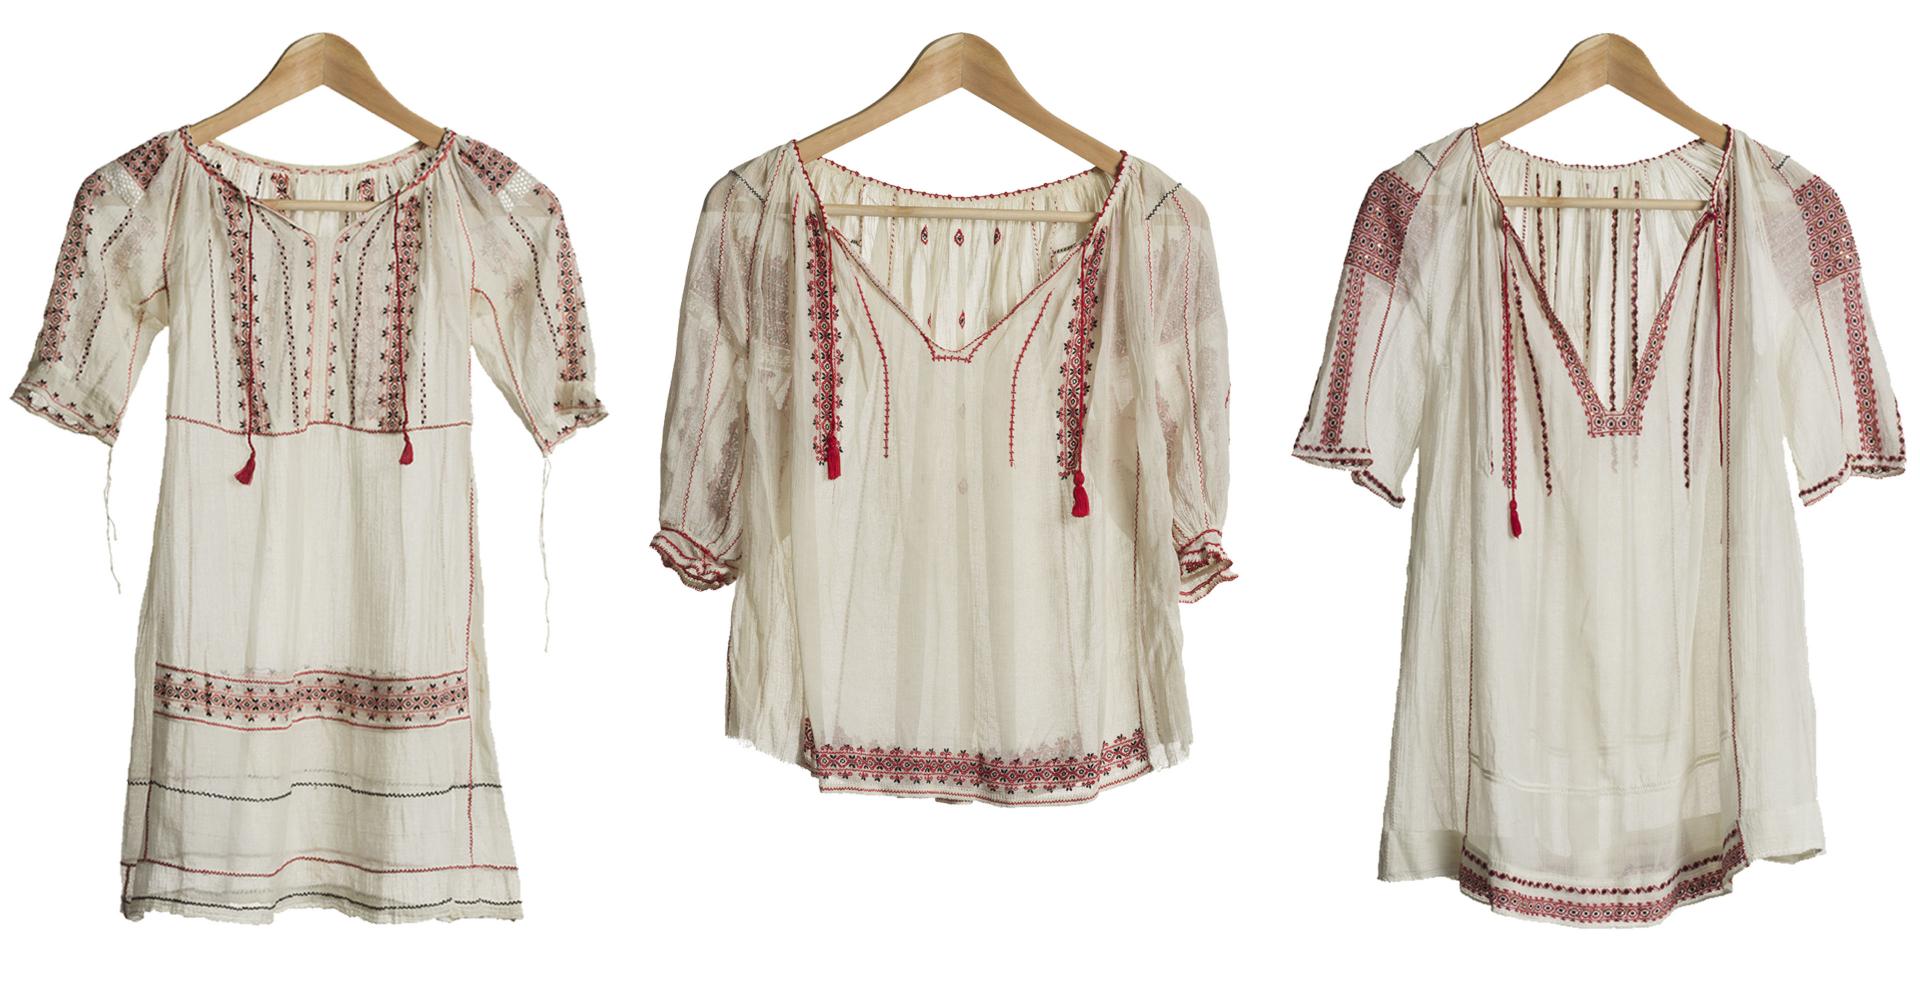 Three white plain blouses with red embroidery